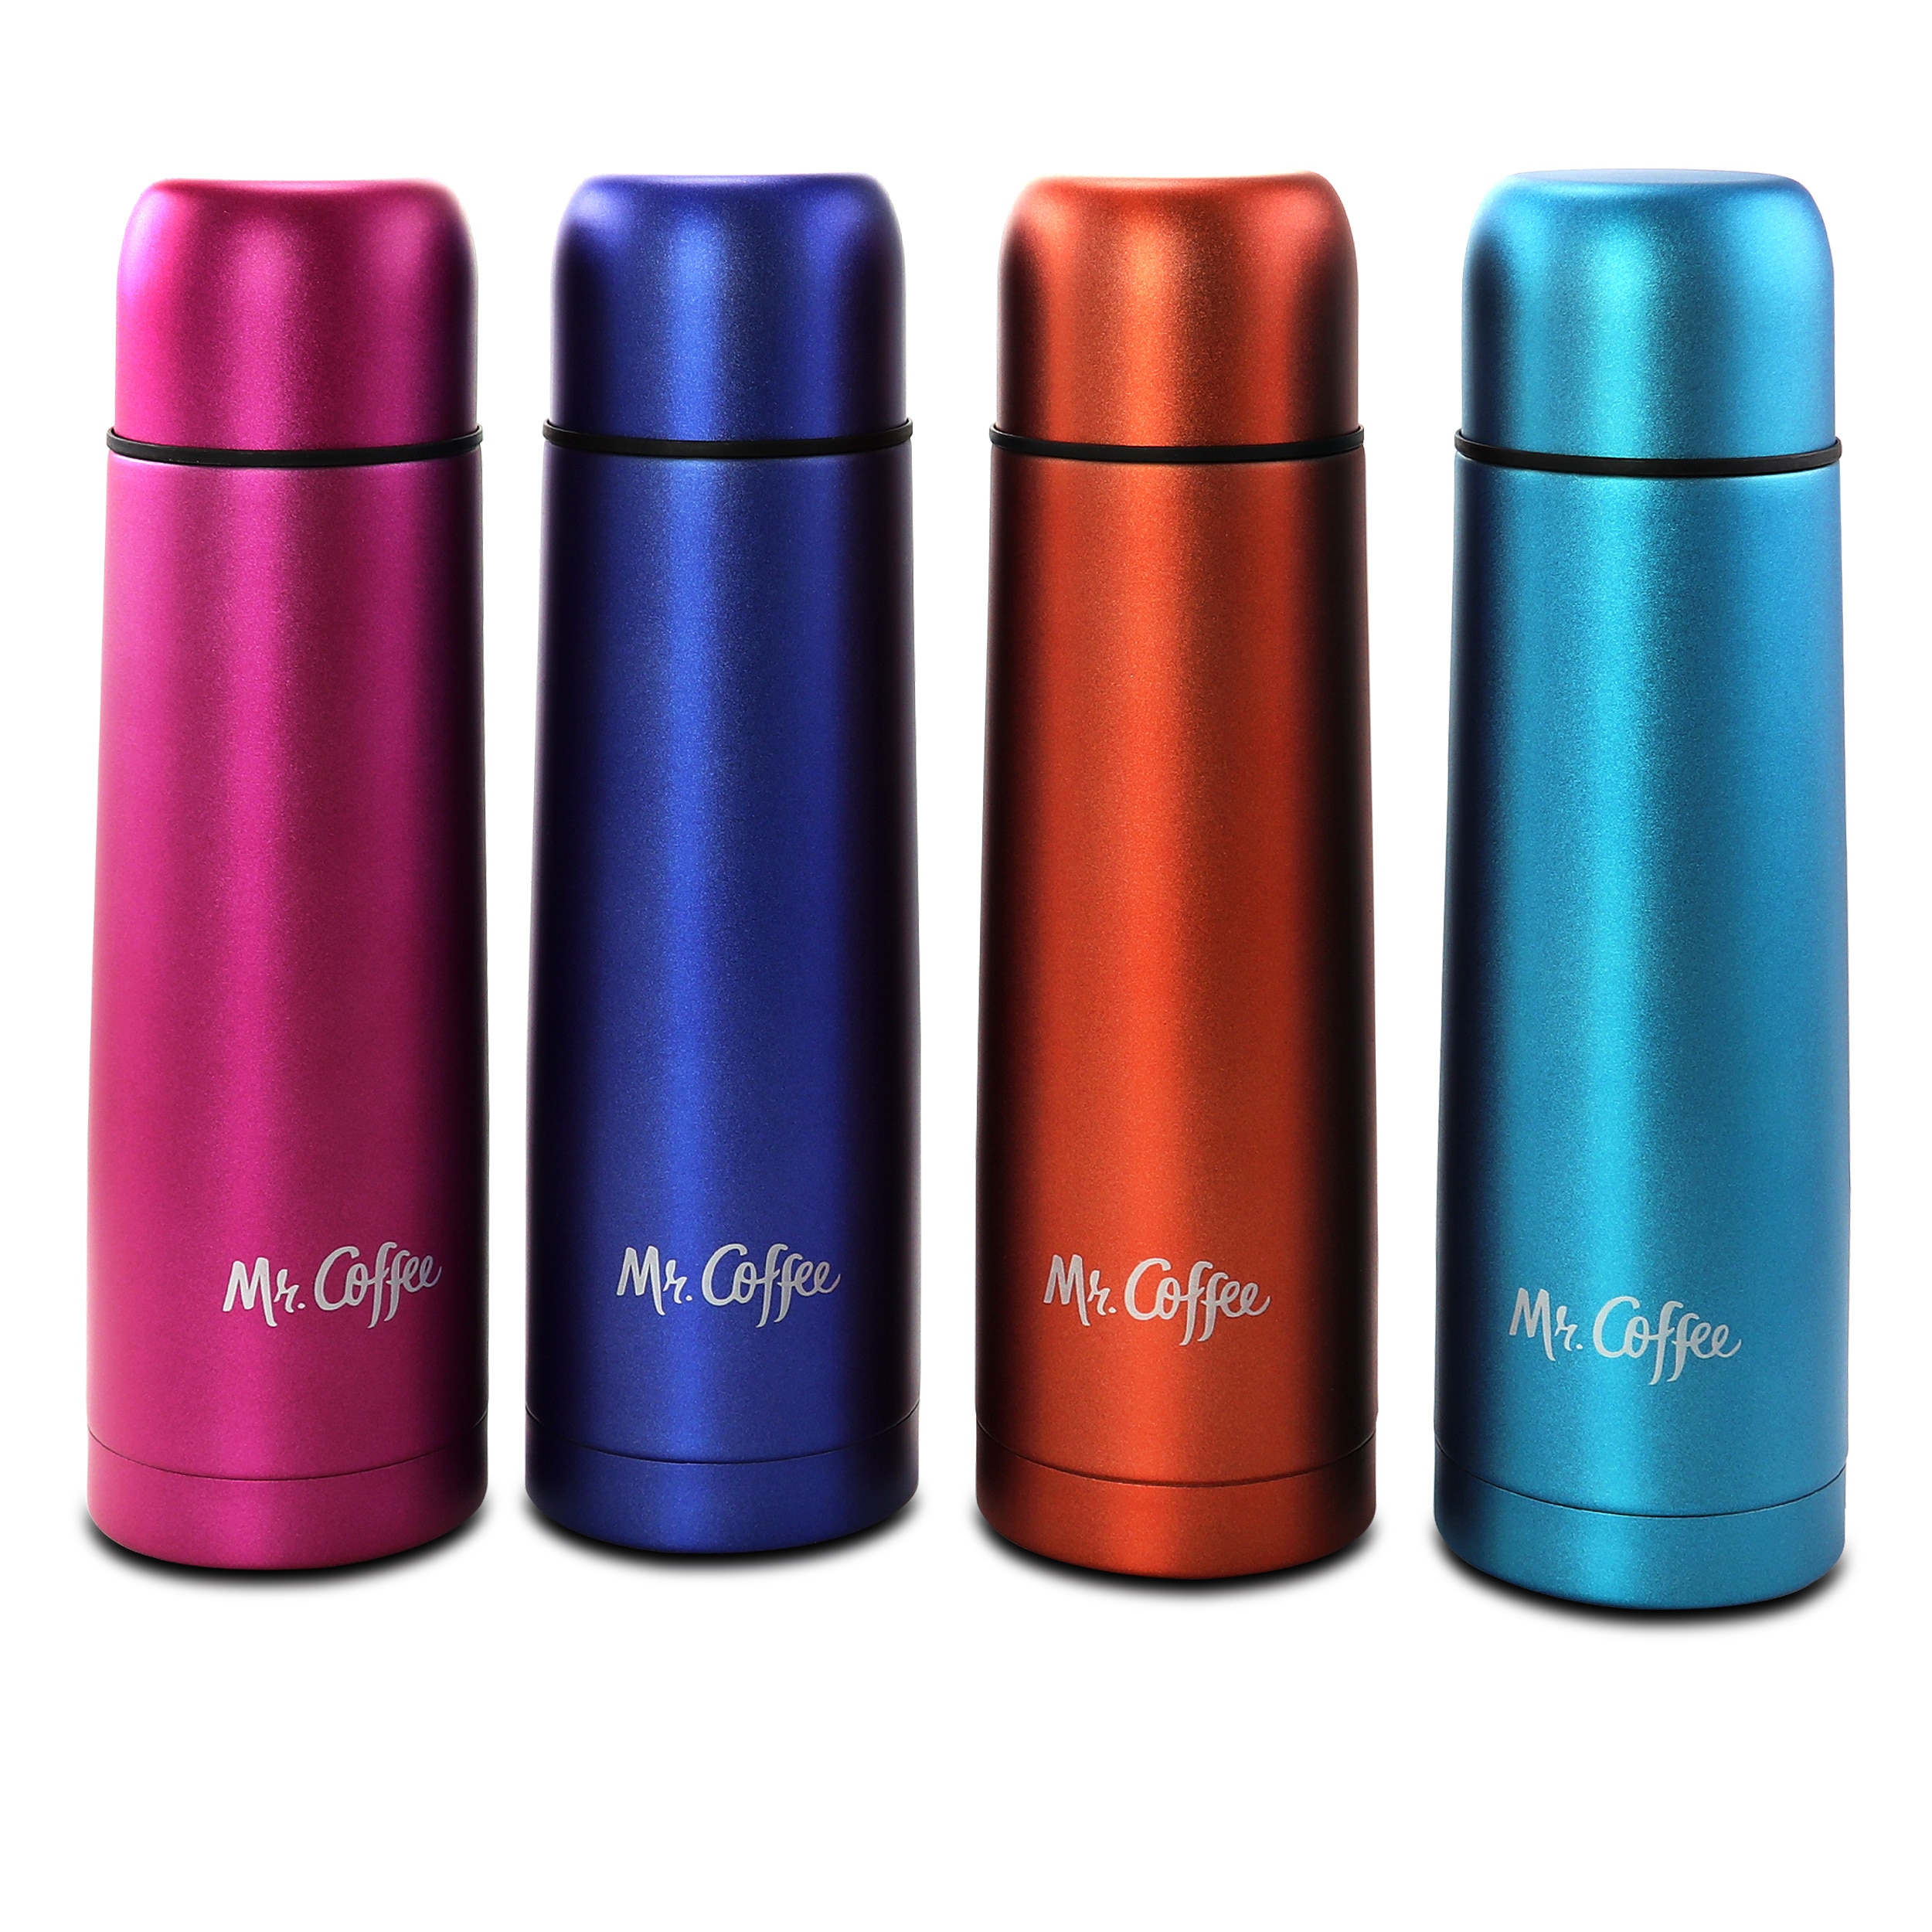 FOUR (4) BOTTLES ThermoFlask 24 oz Stainless Steel Insulated Water Bottle  2-Pack